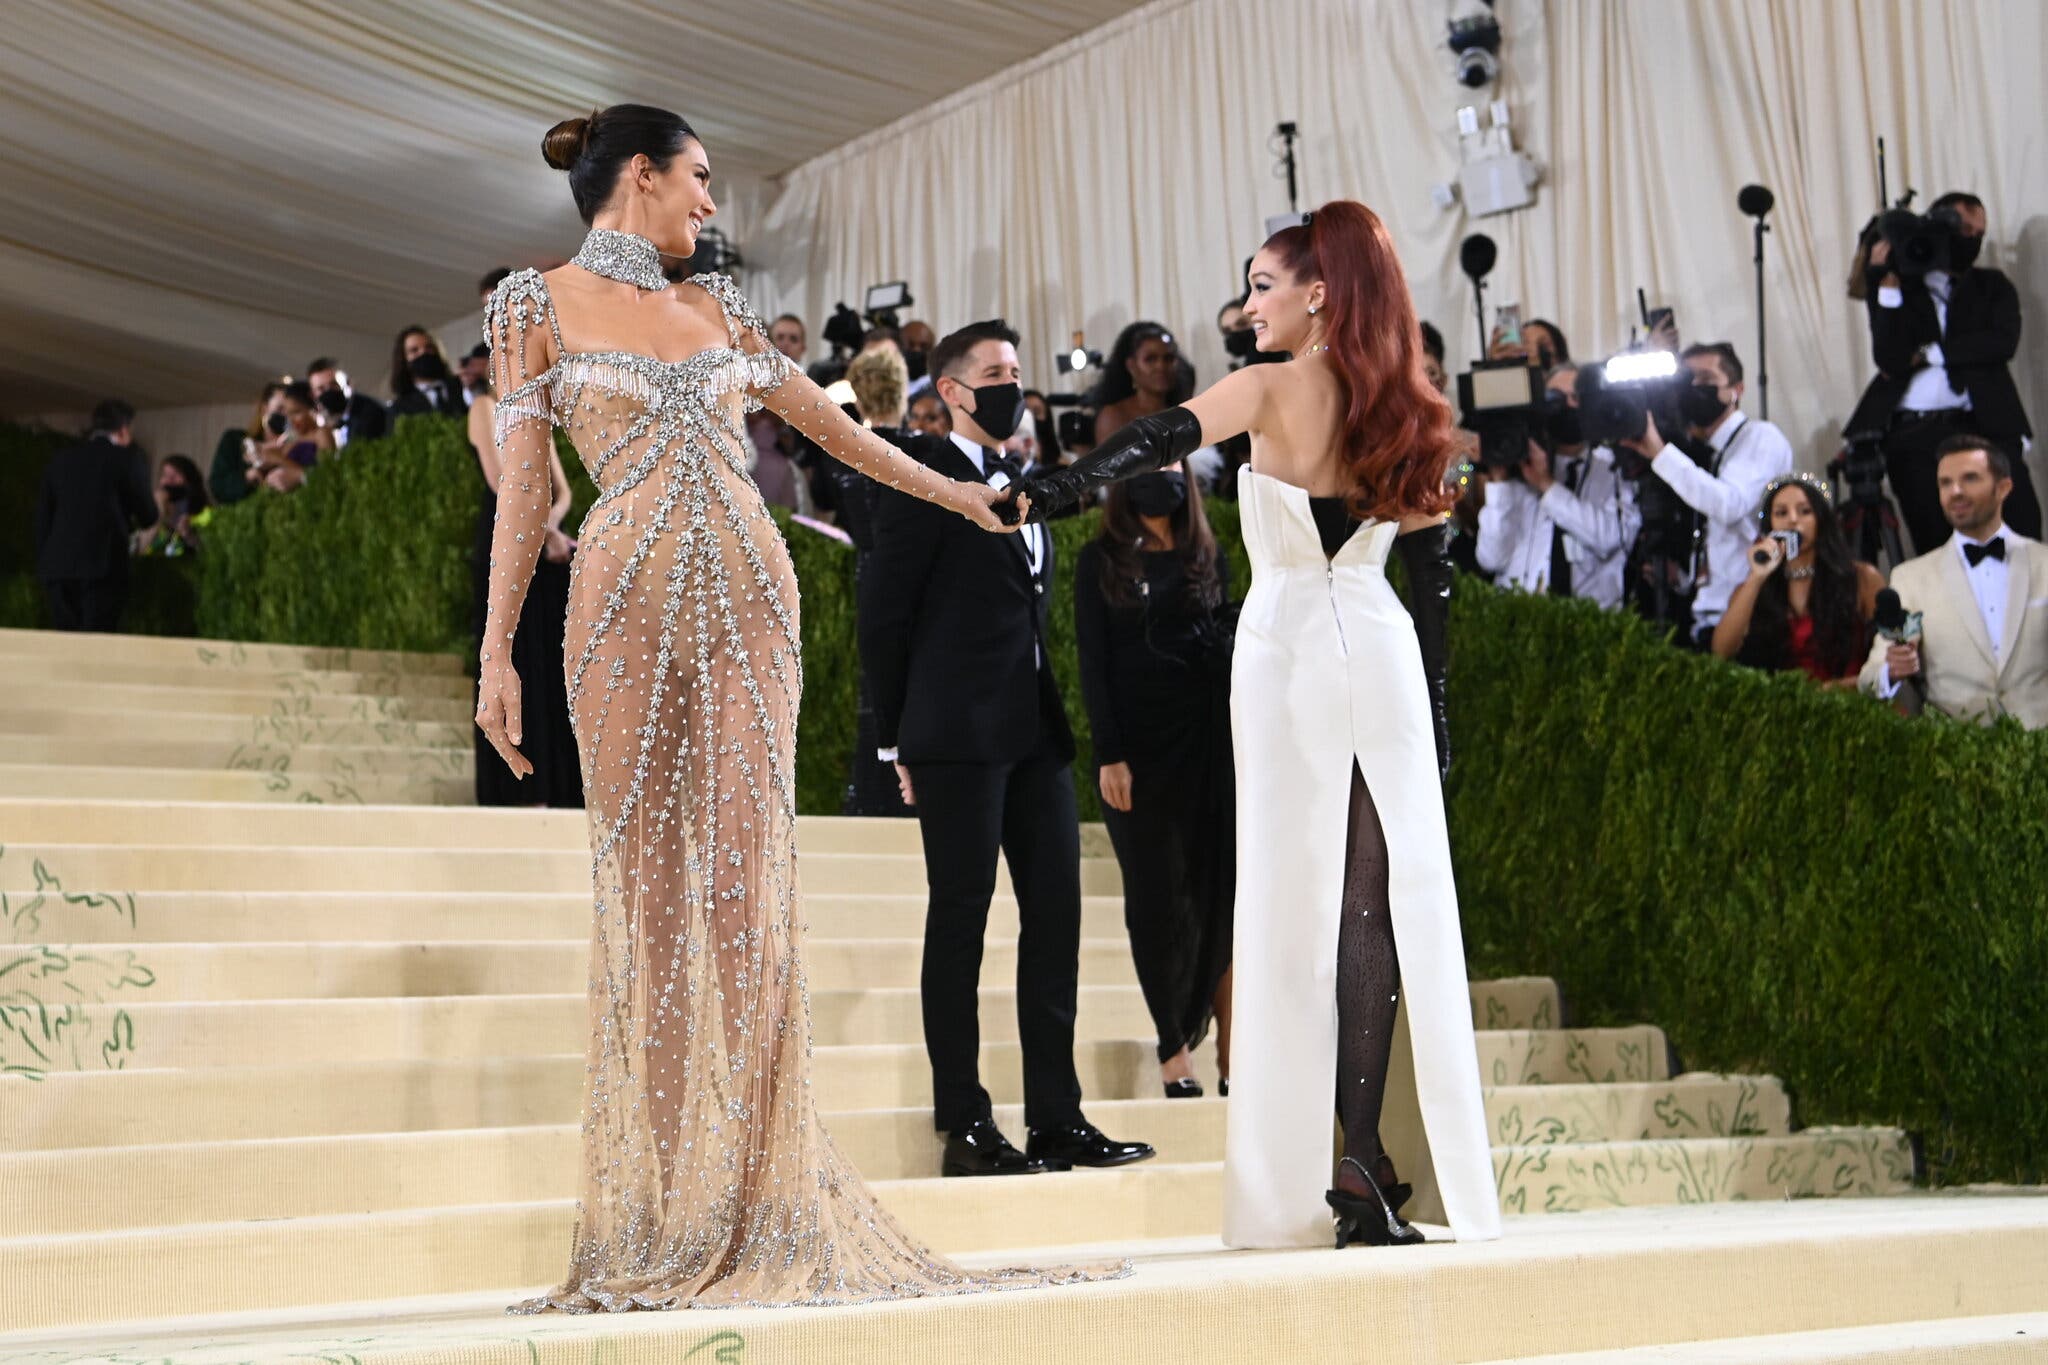 Met Gala 2021 Red Carpet: The Best Dressed Outfits & Looks